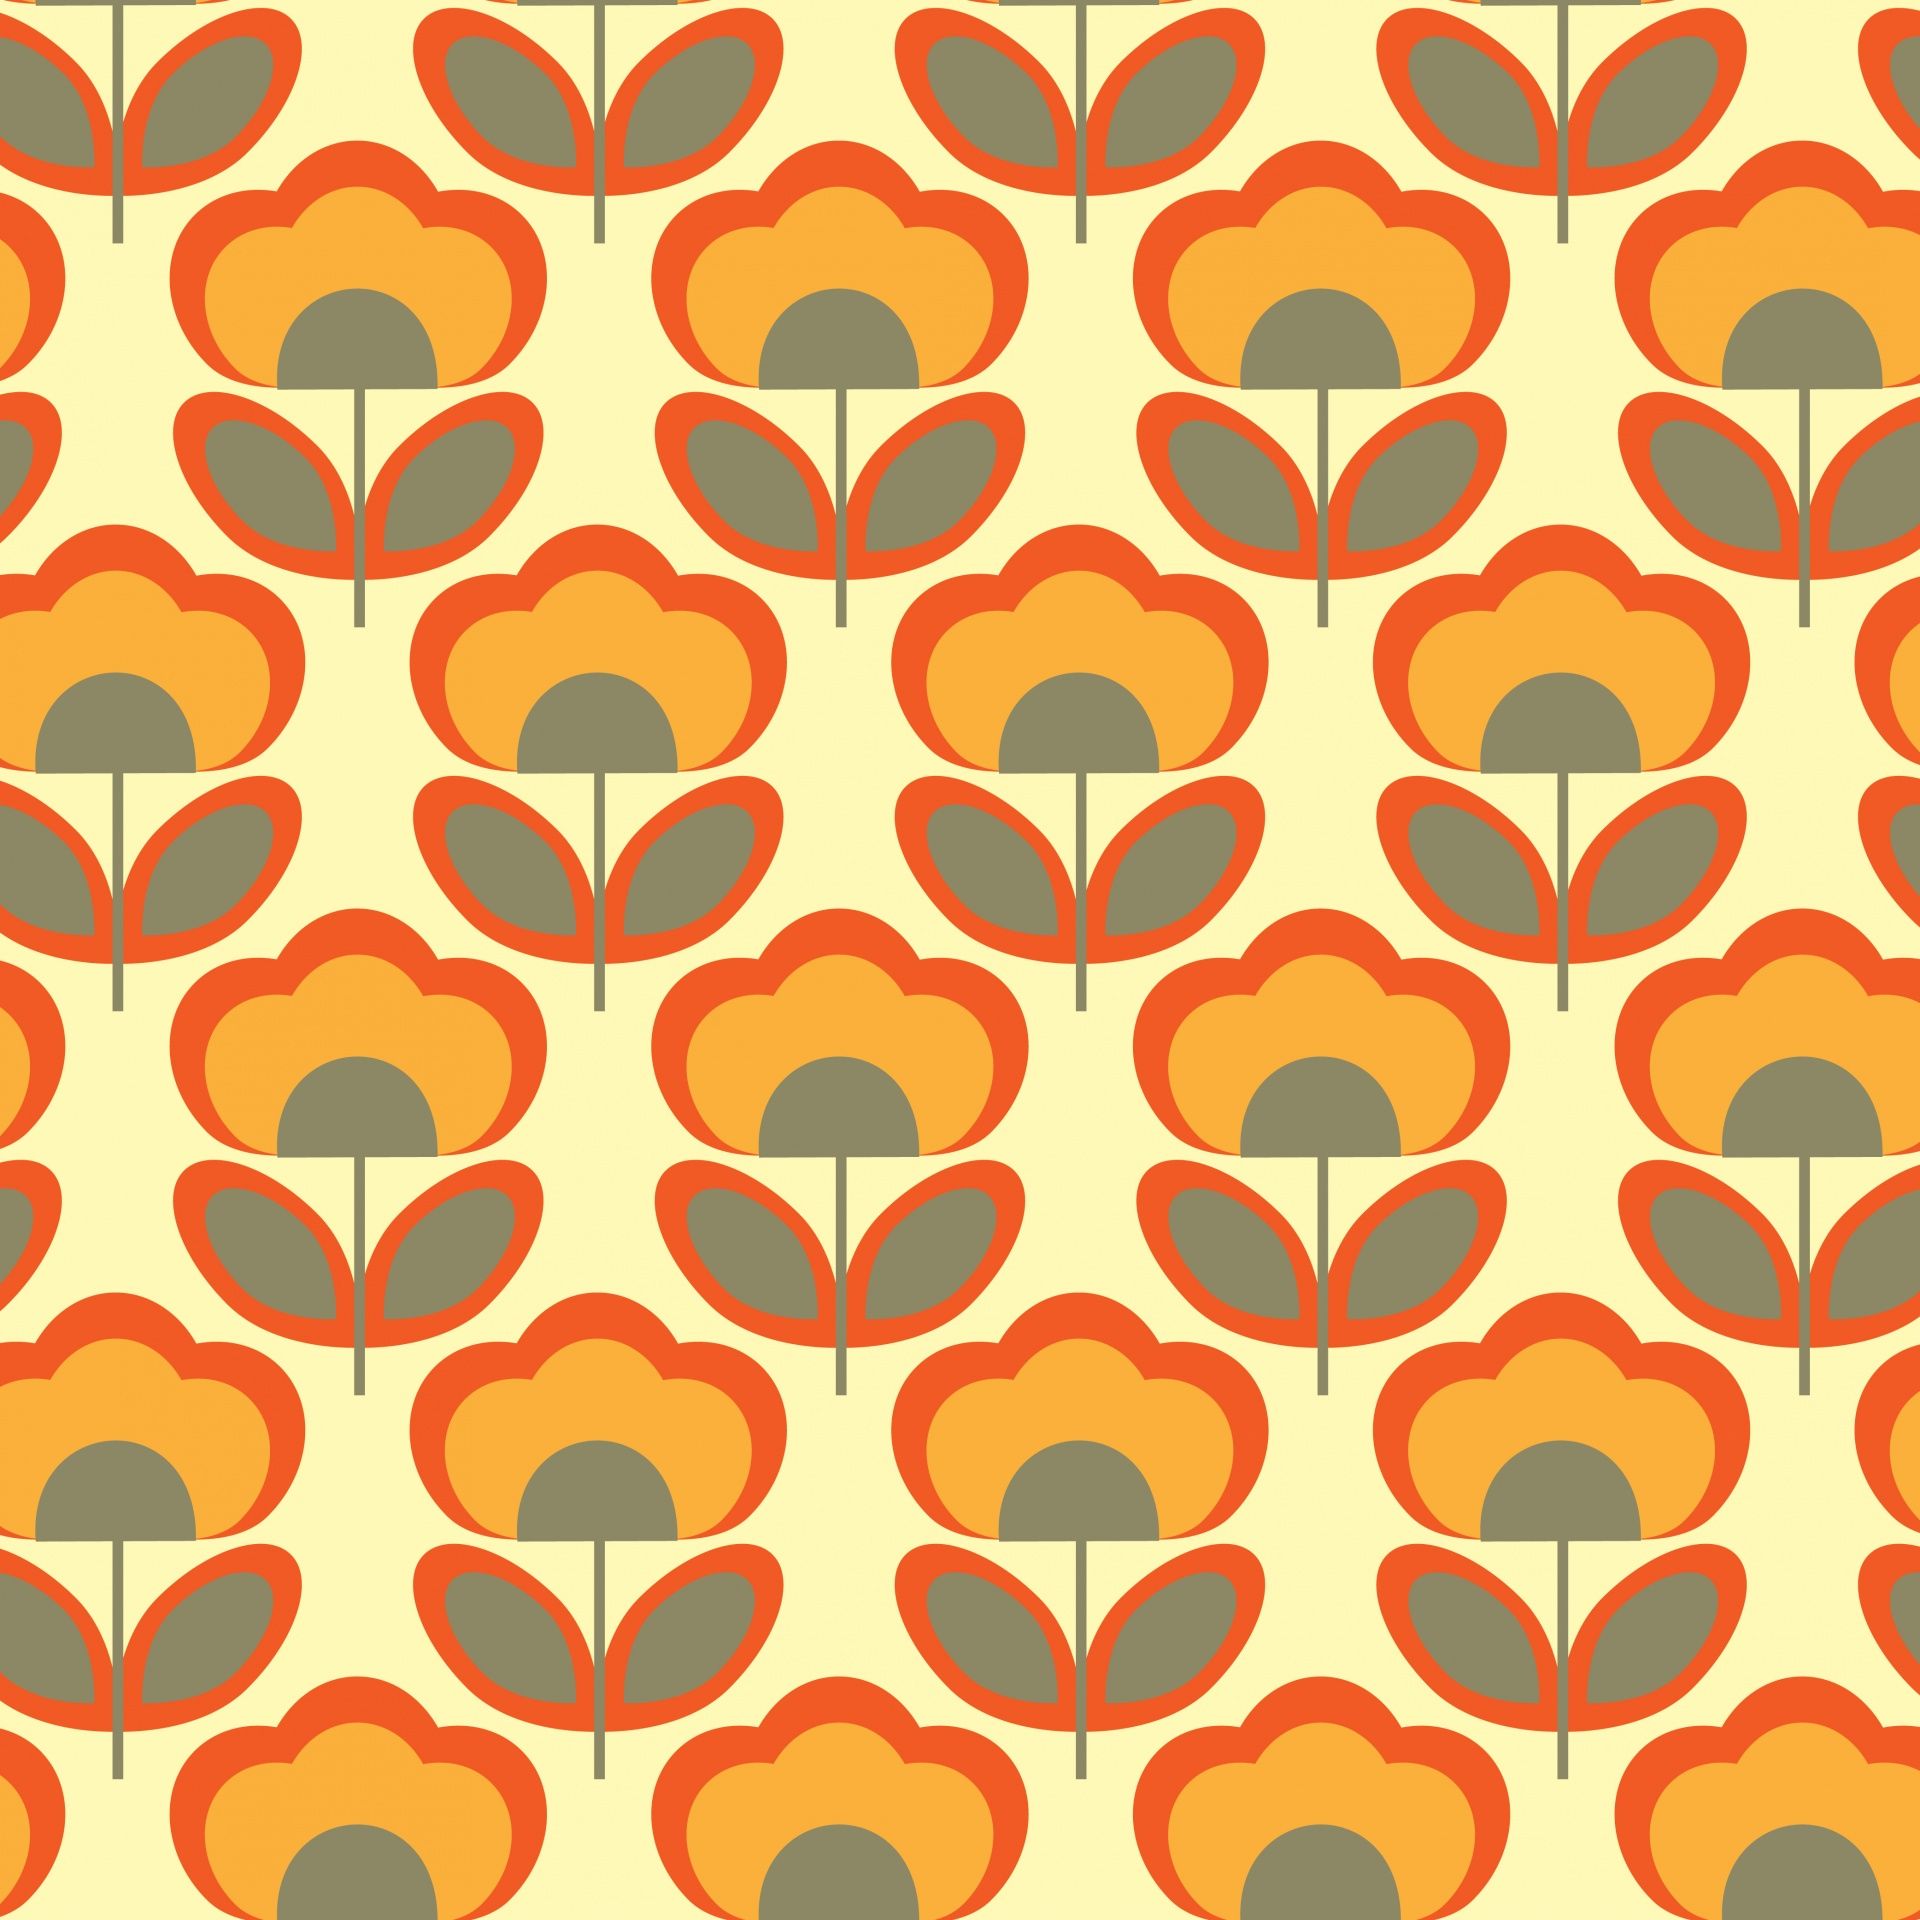 Vintage 70s Aesthetic Wallpaper Free Vintage 70s Aesthetic Background